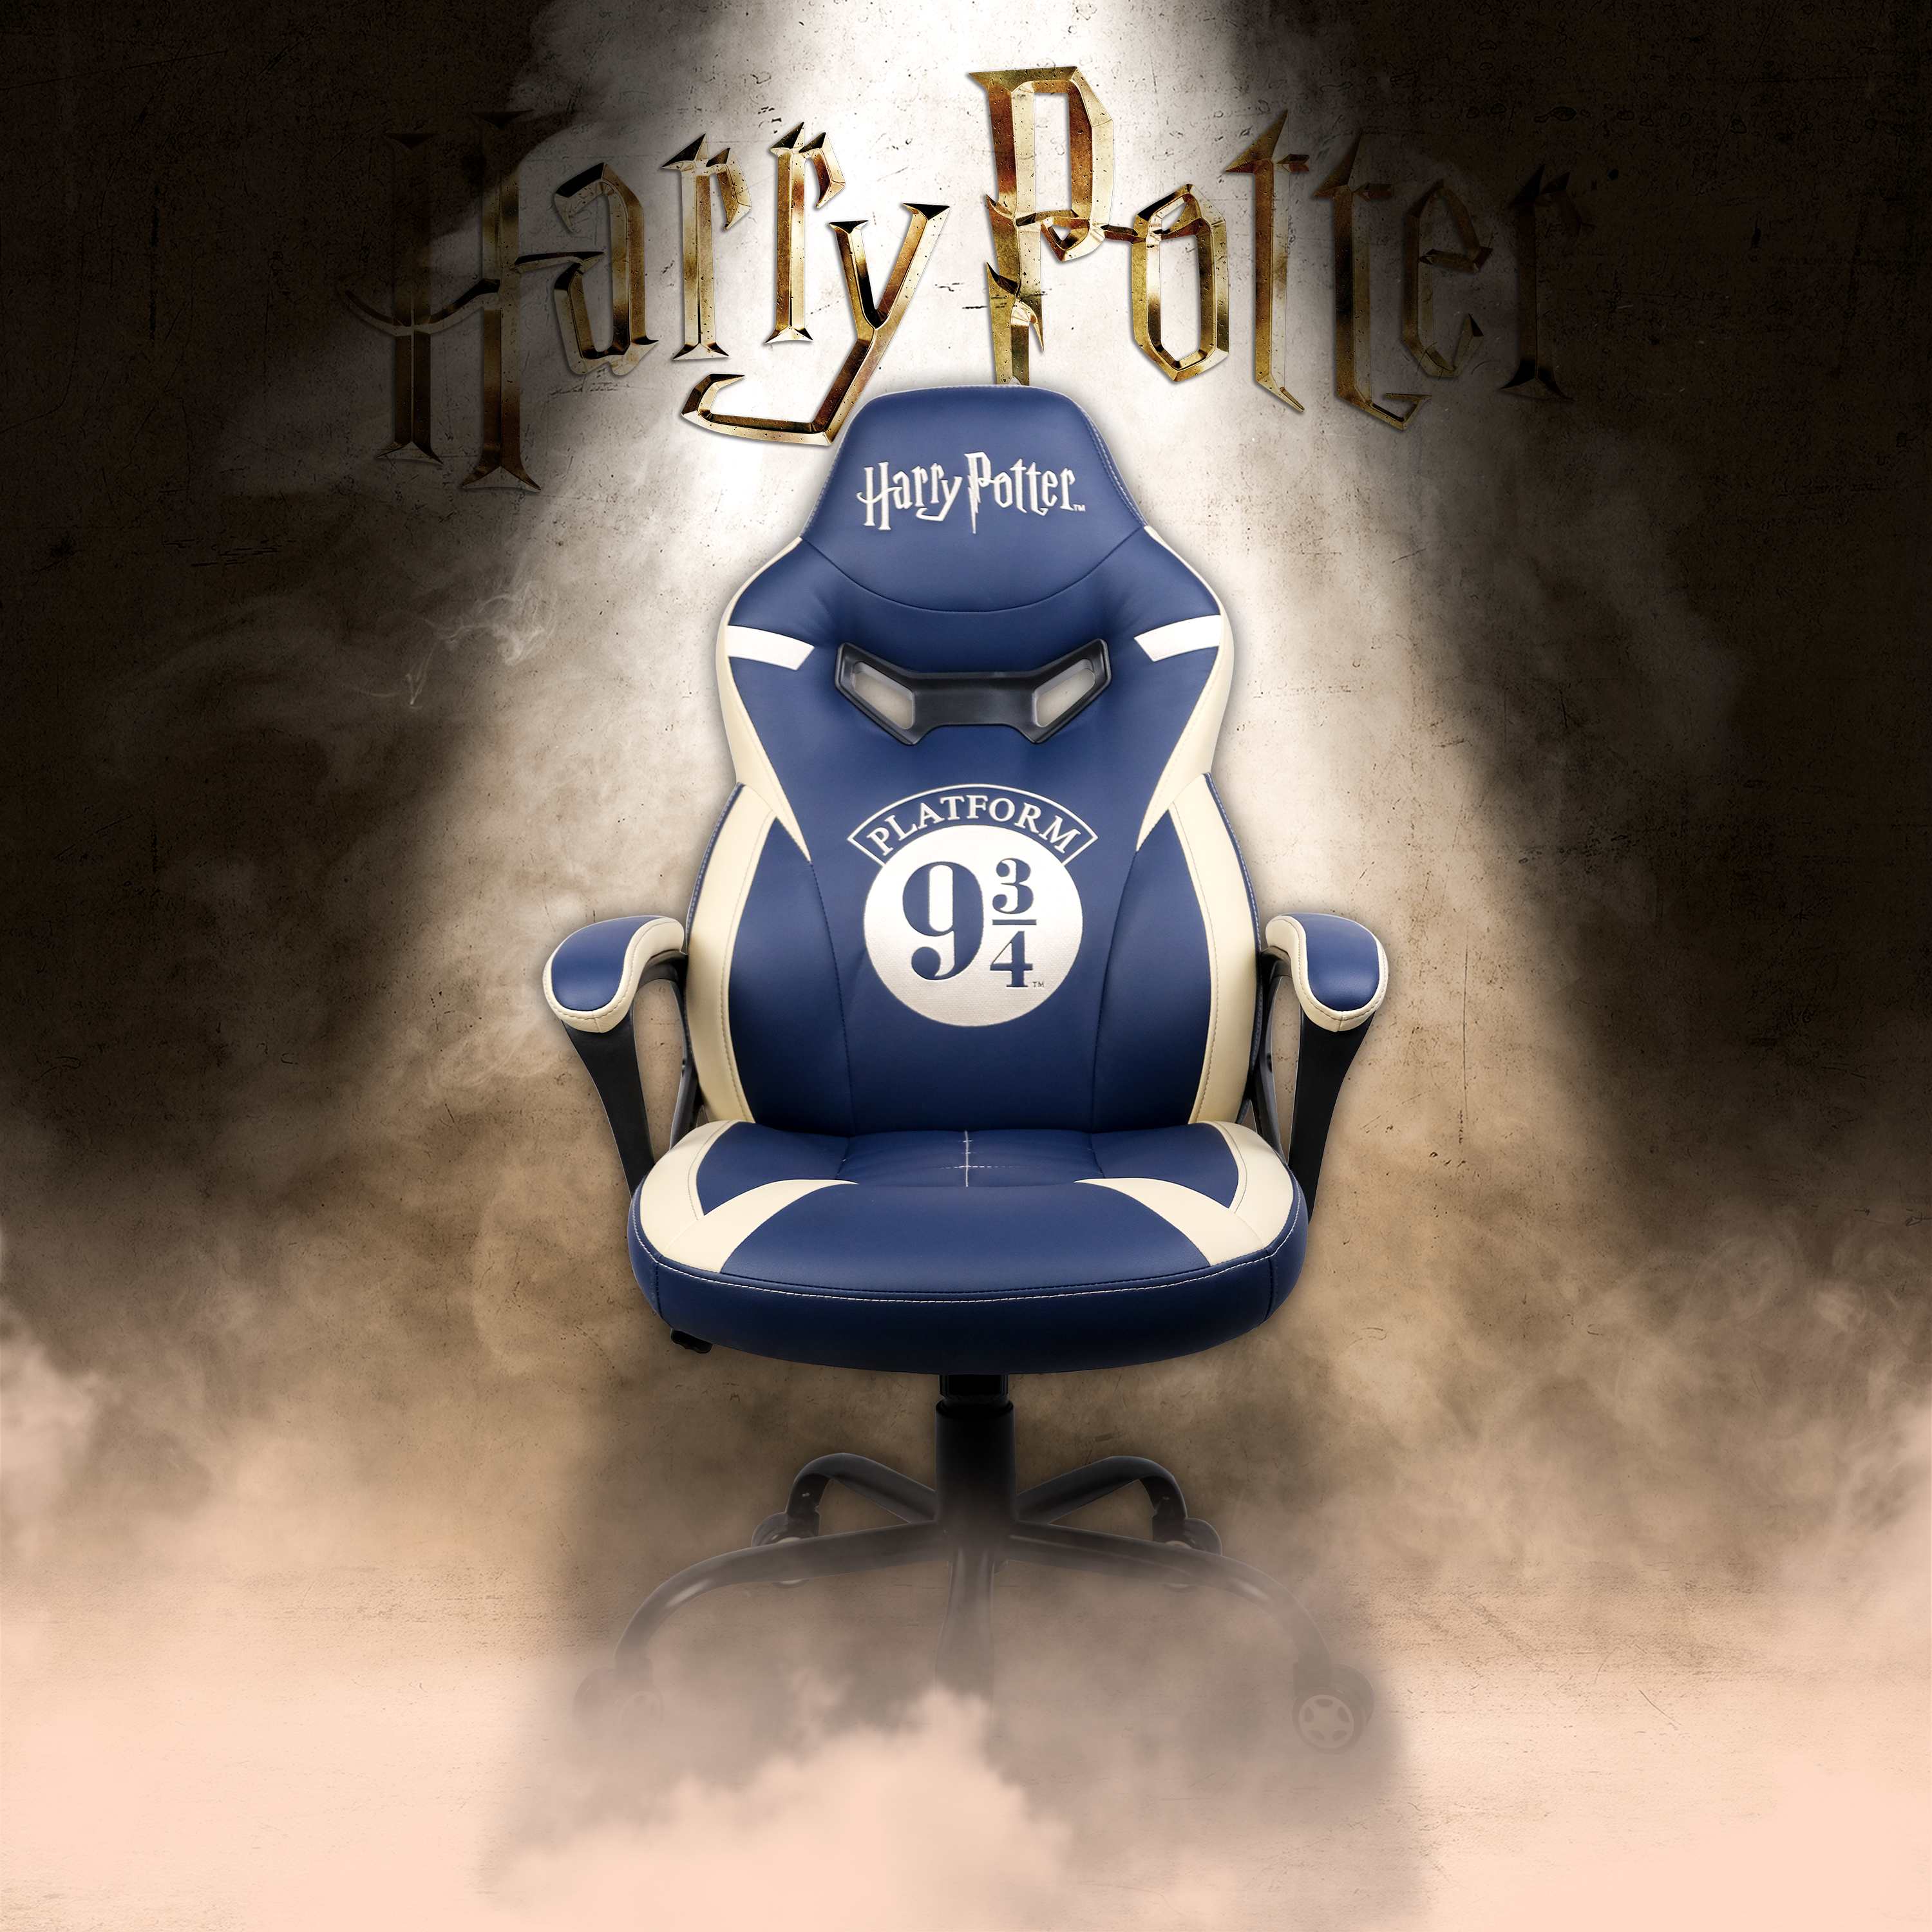 Discover our collection of new Harry Potter merchandise